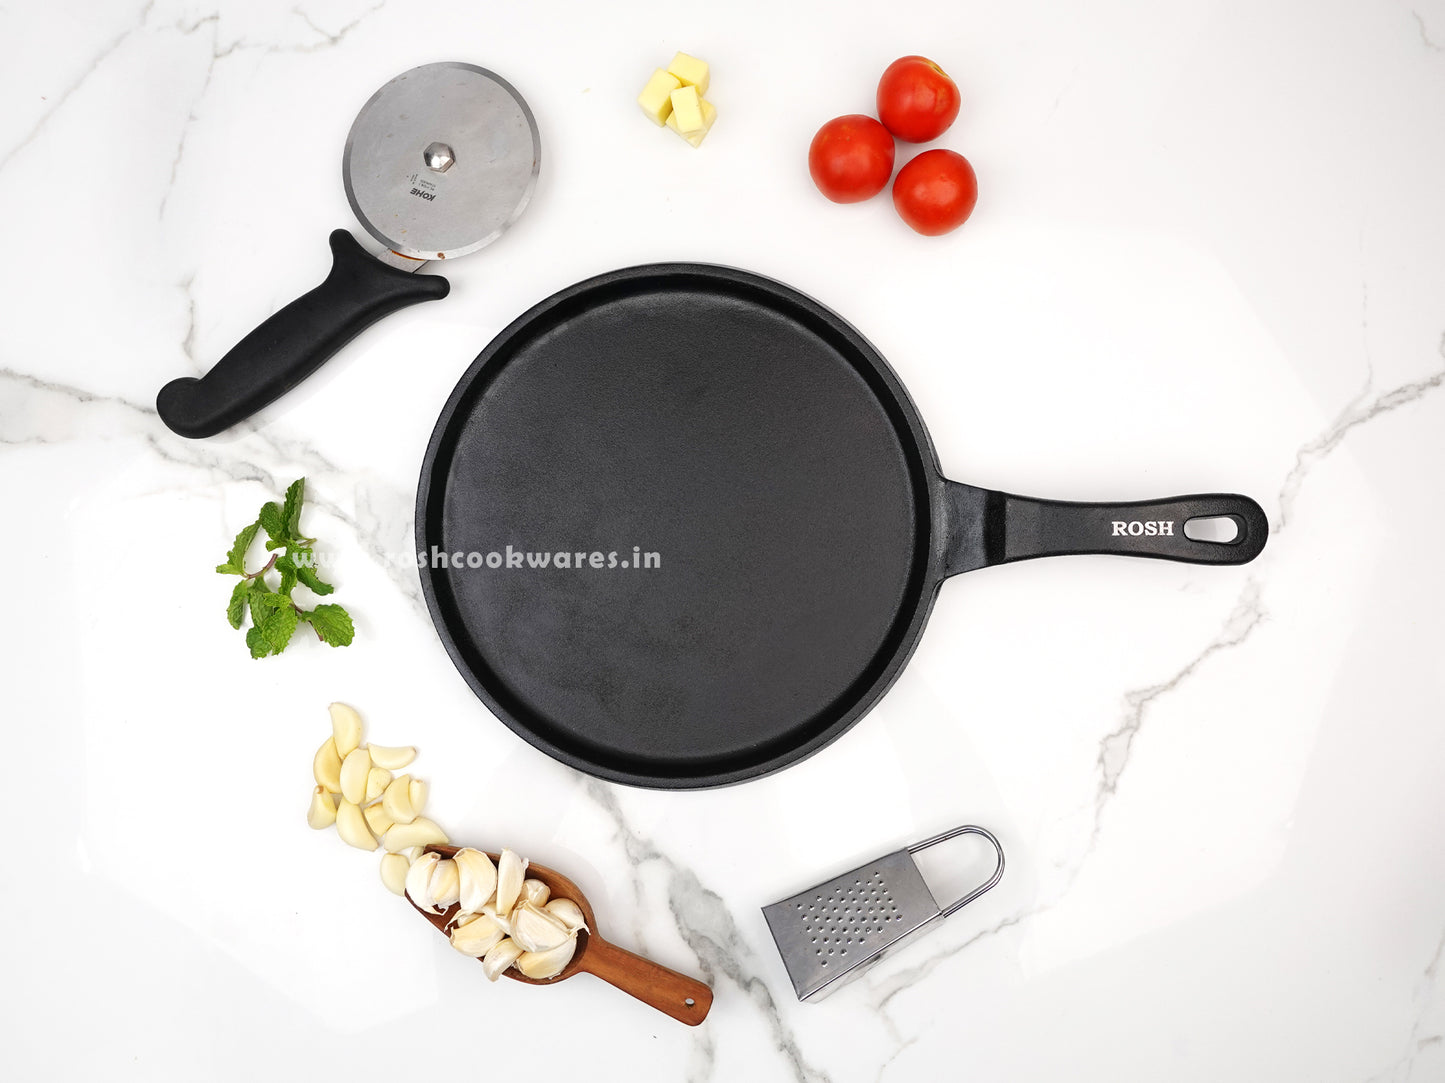 Pizza Pan - Cast Iron - Long Handle - Seasoned - Naturally Nonstick - 100% Pure - Toxin-free.